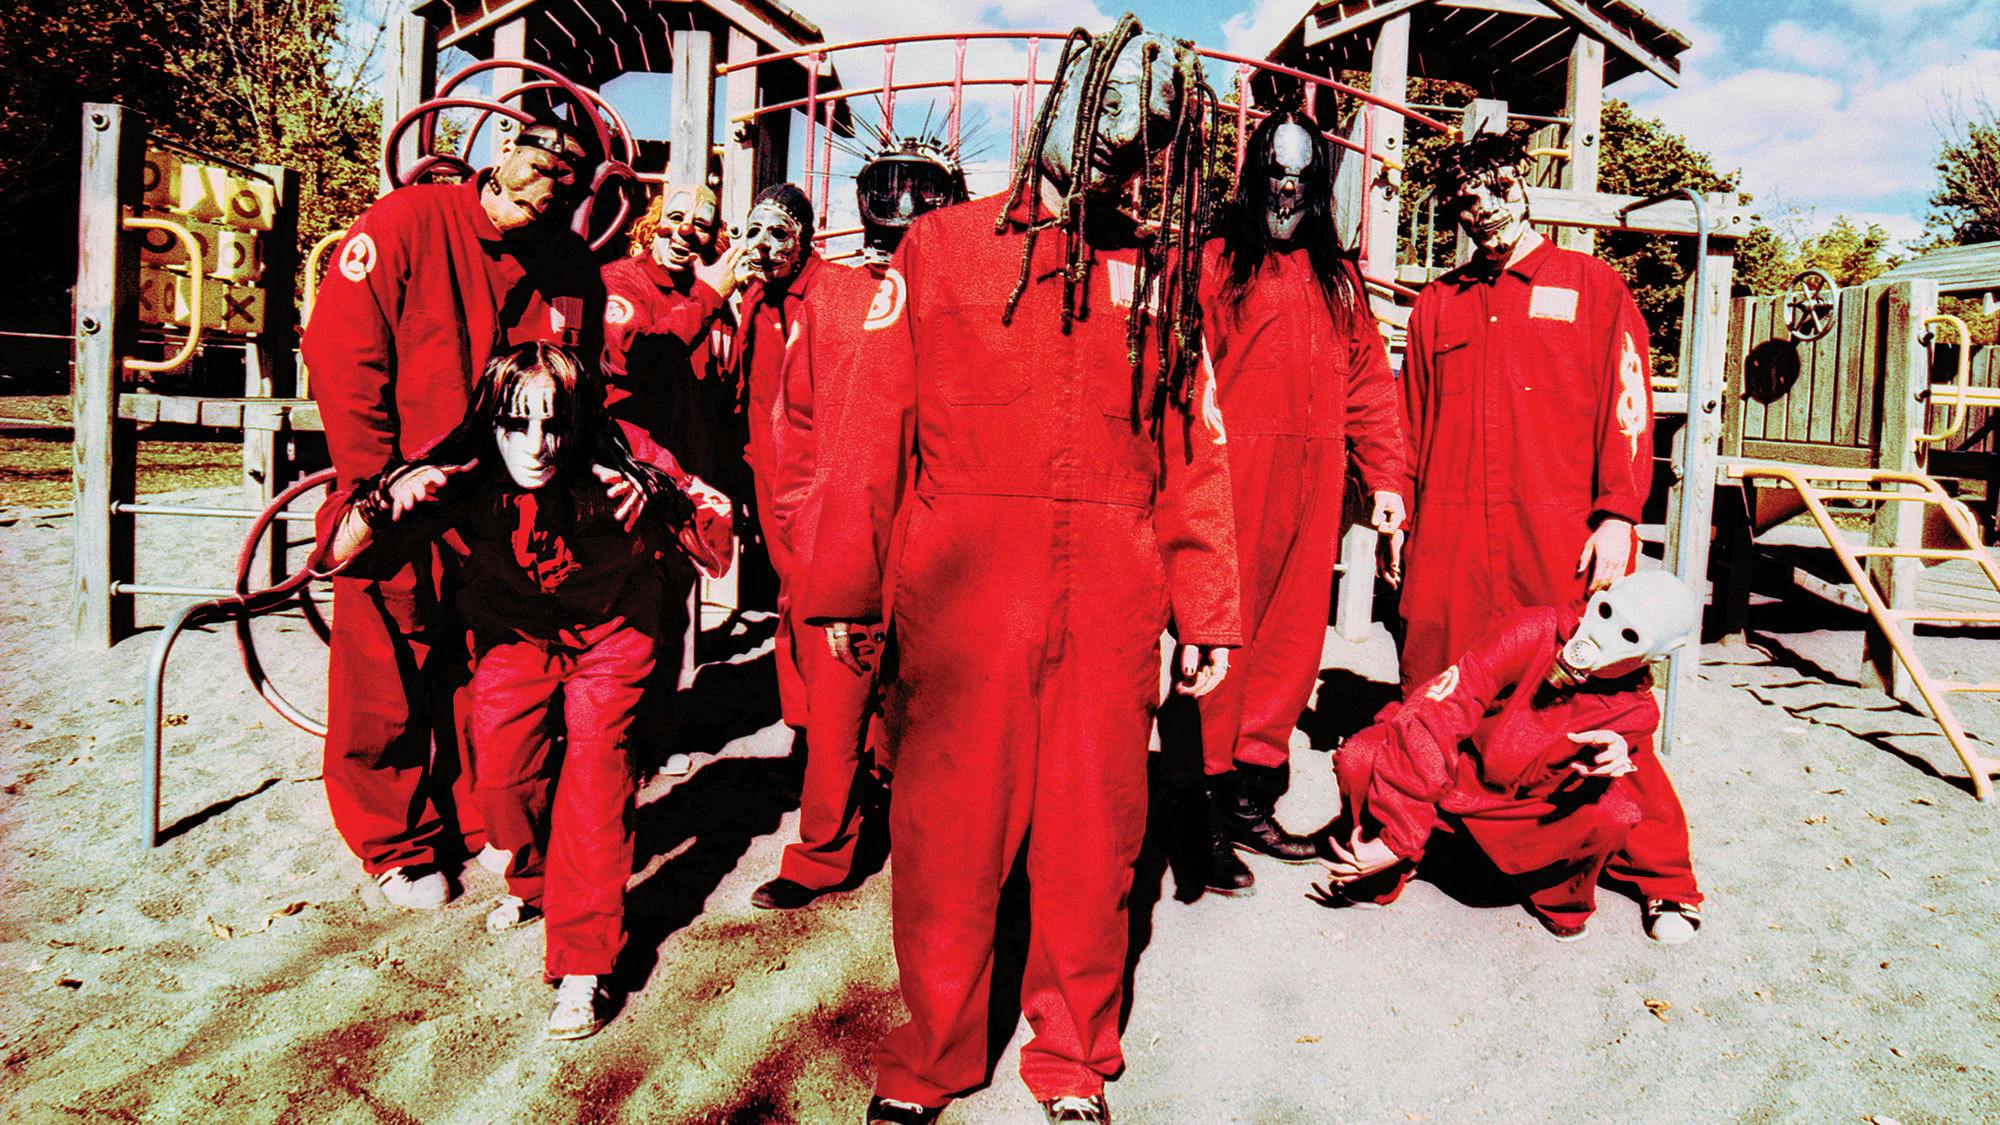 “Thoroughly unpleasant and truly unforgettable”: Our original 1999 review of Slipknot’s debut album